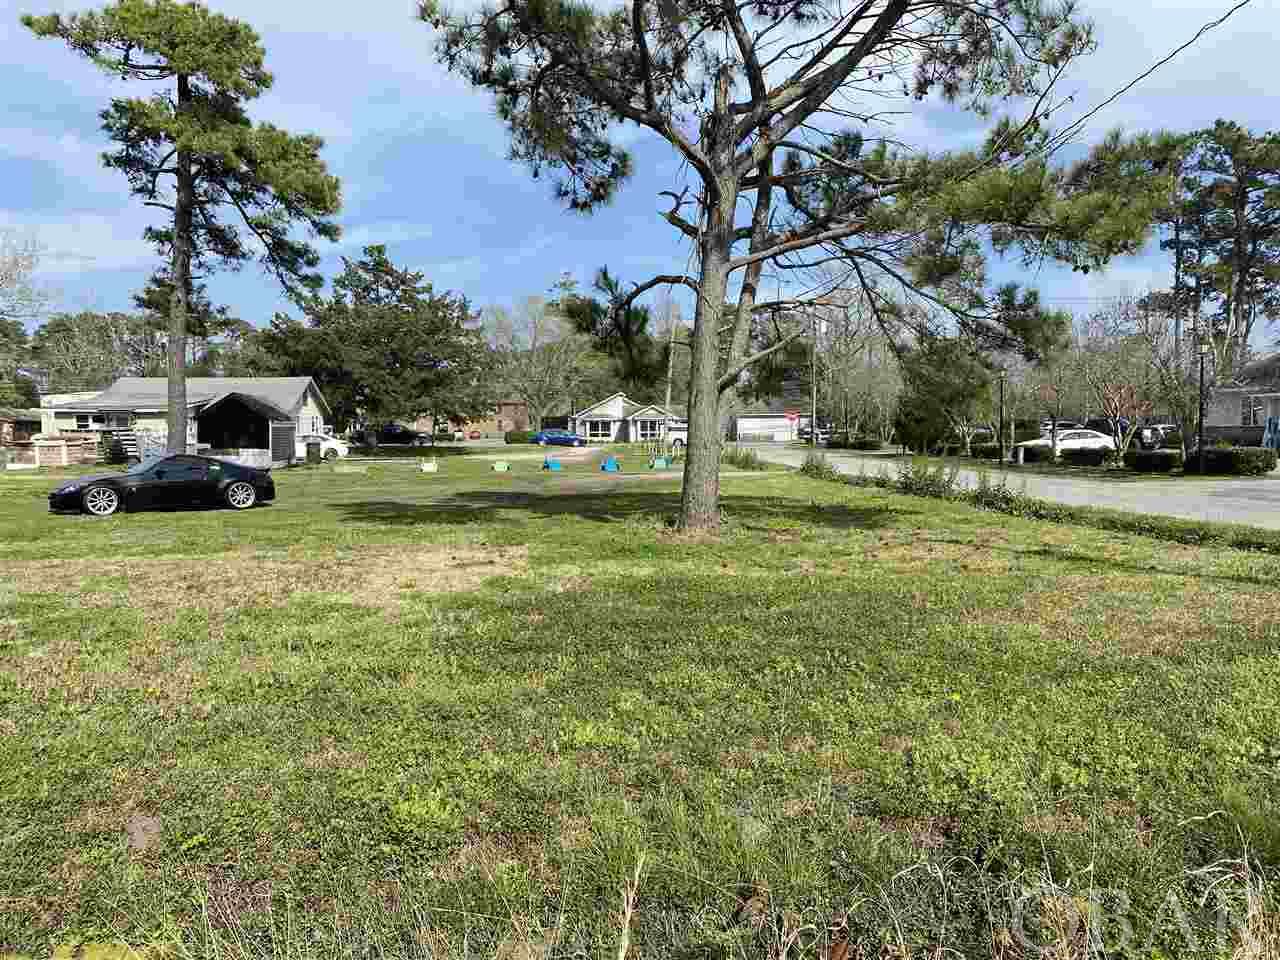 Large corner lot in Manteo, located close to schools and downtown Manteo.  This lot is zoned commercial / residential.  Make an offer!!!